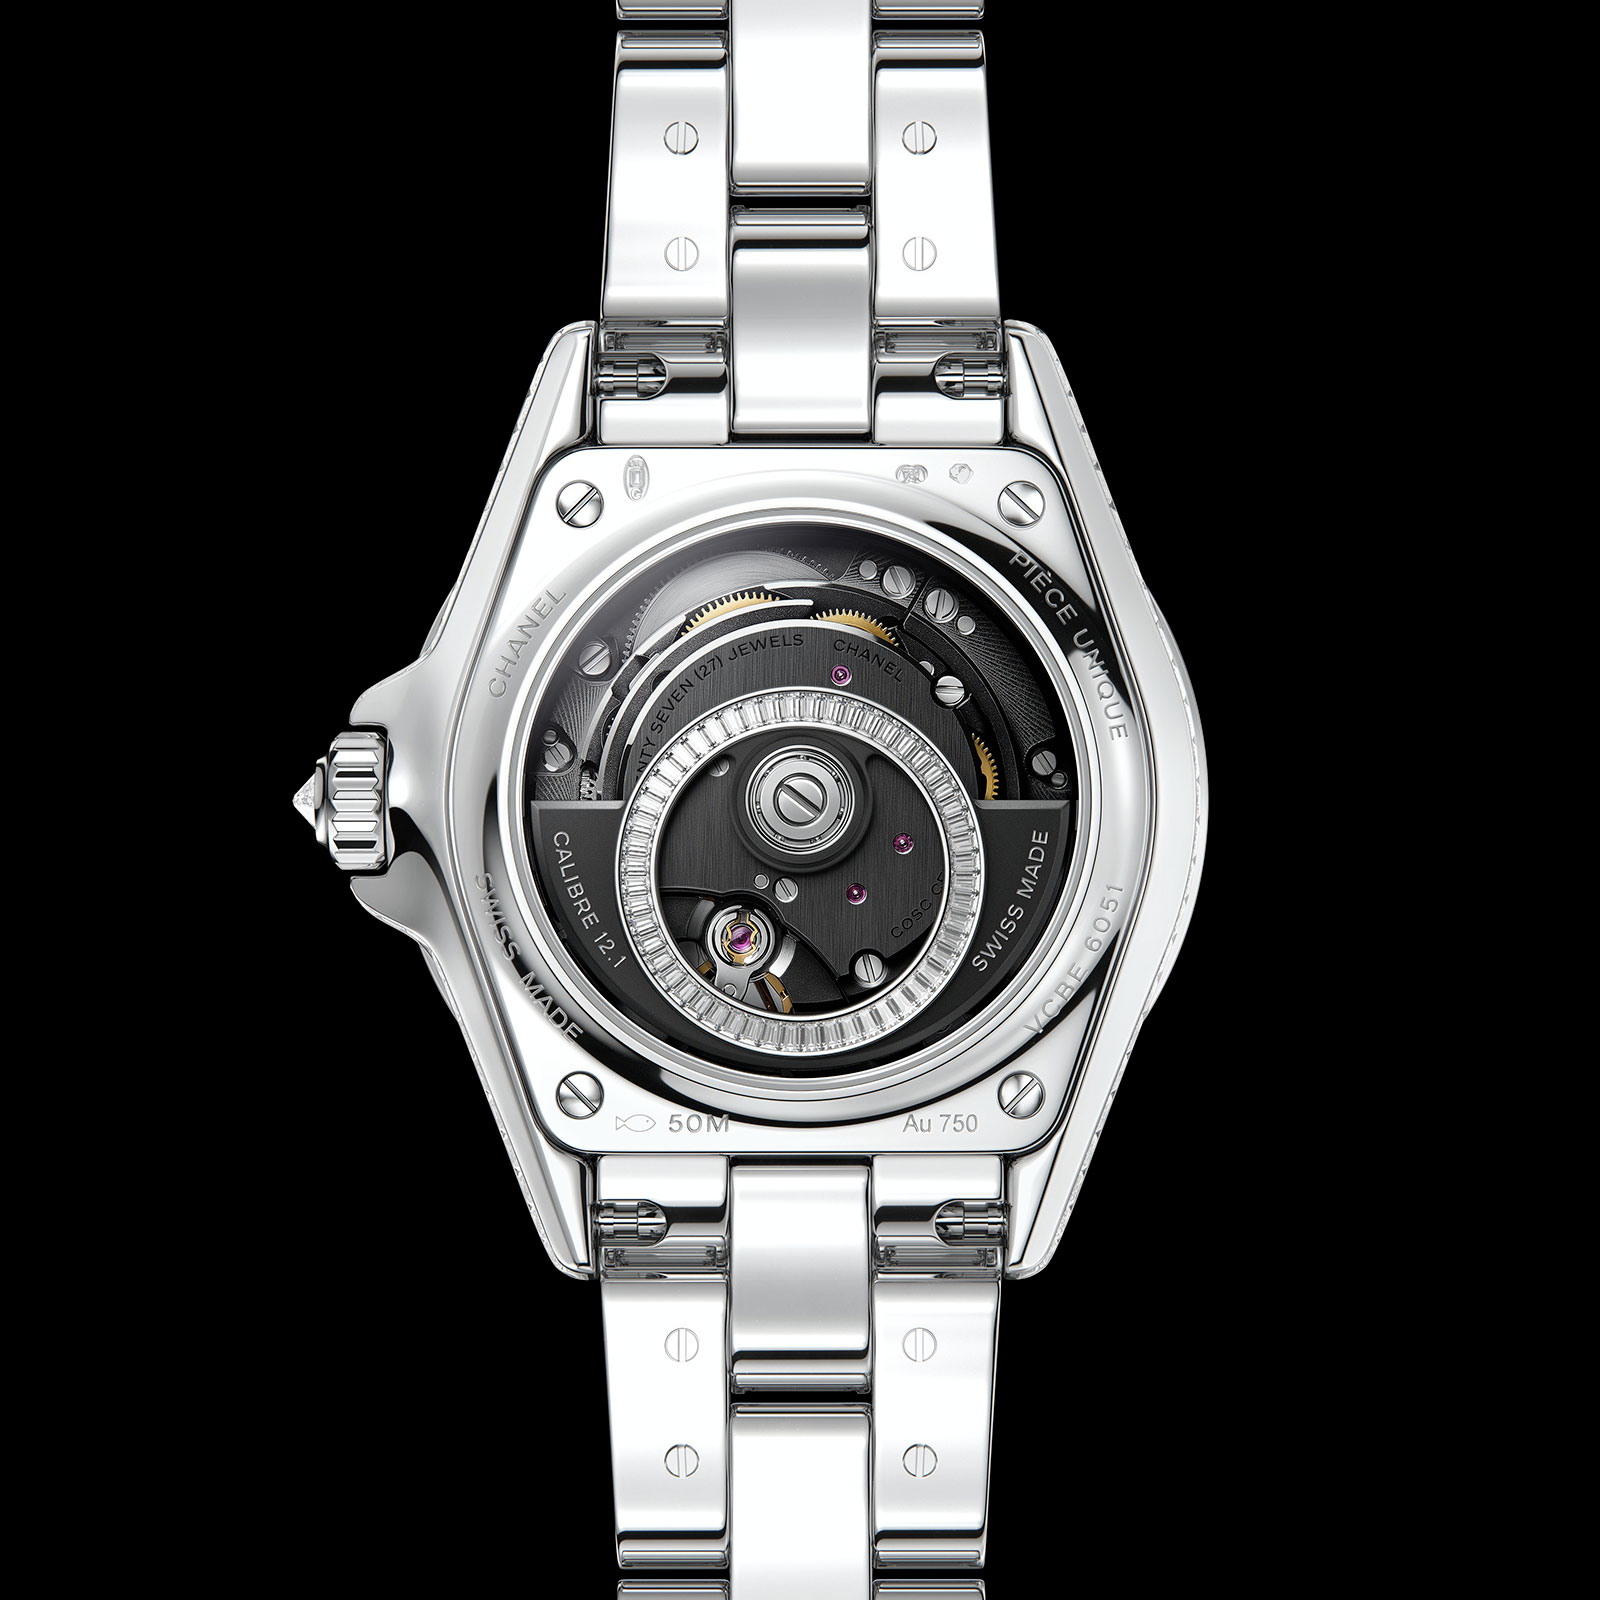 The New Chanel J12 with 'Manufacture' Movement – All You Need to Know